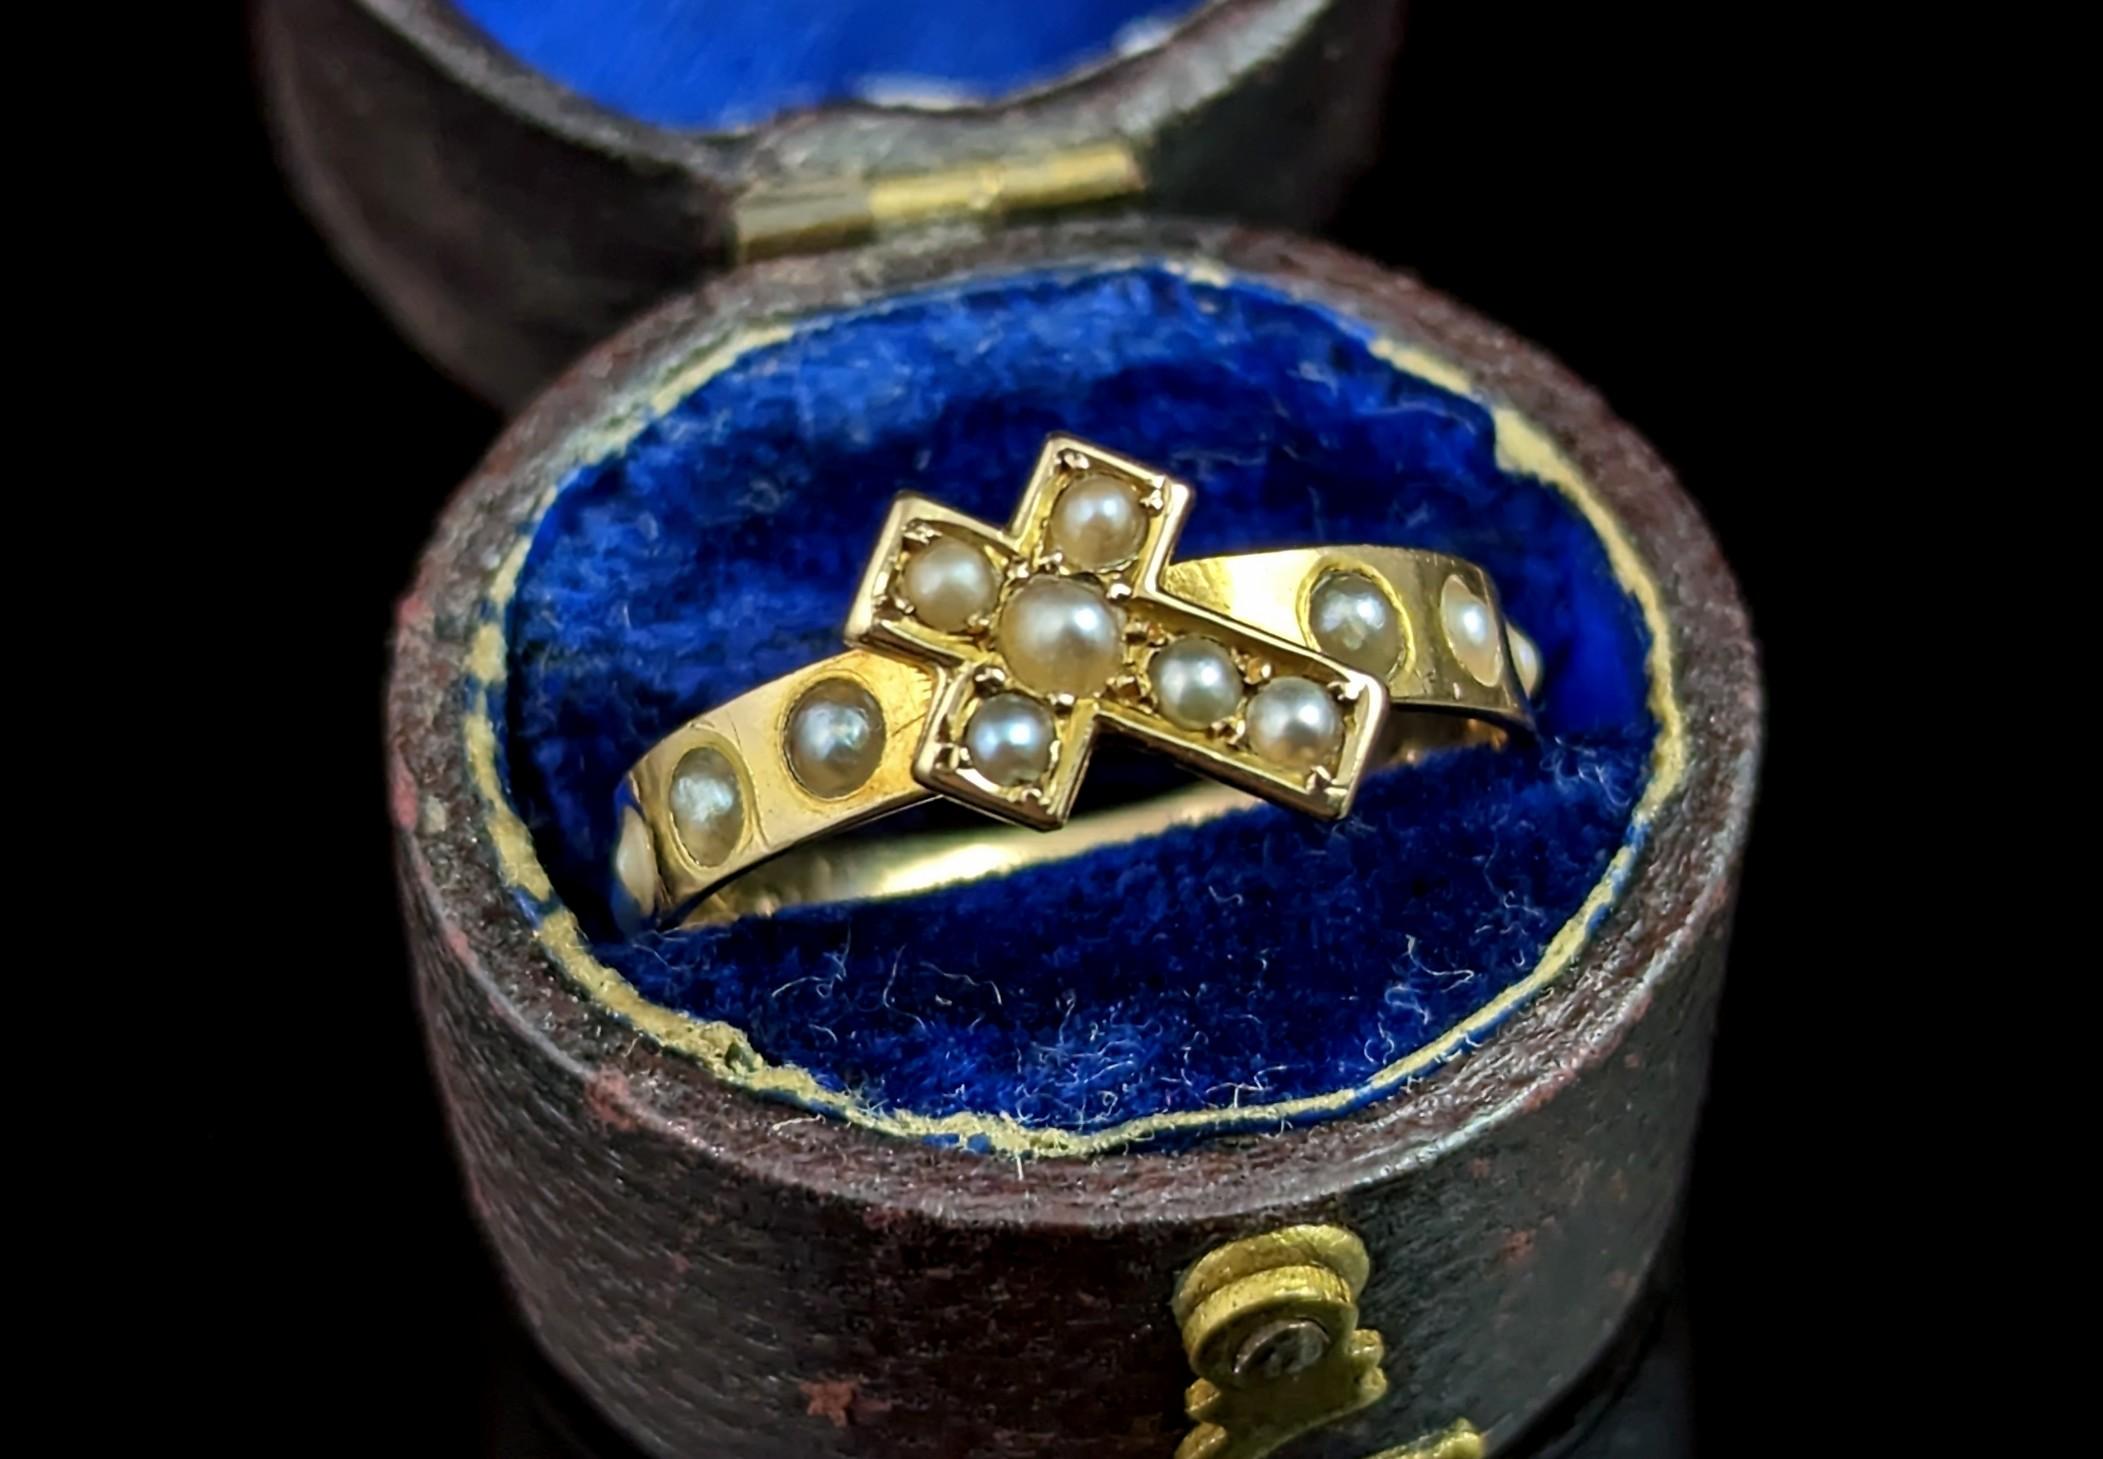 This rare antique French pearl cross ring is really quite a magnificent piece.

It is crafted from 18kt yellow gold with a straight band in an almost eternity style with seed pearls adorning the band almost all the way round.

The front of the band